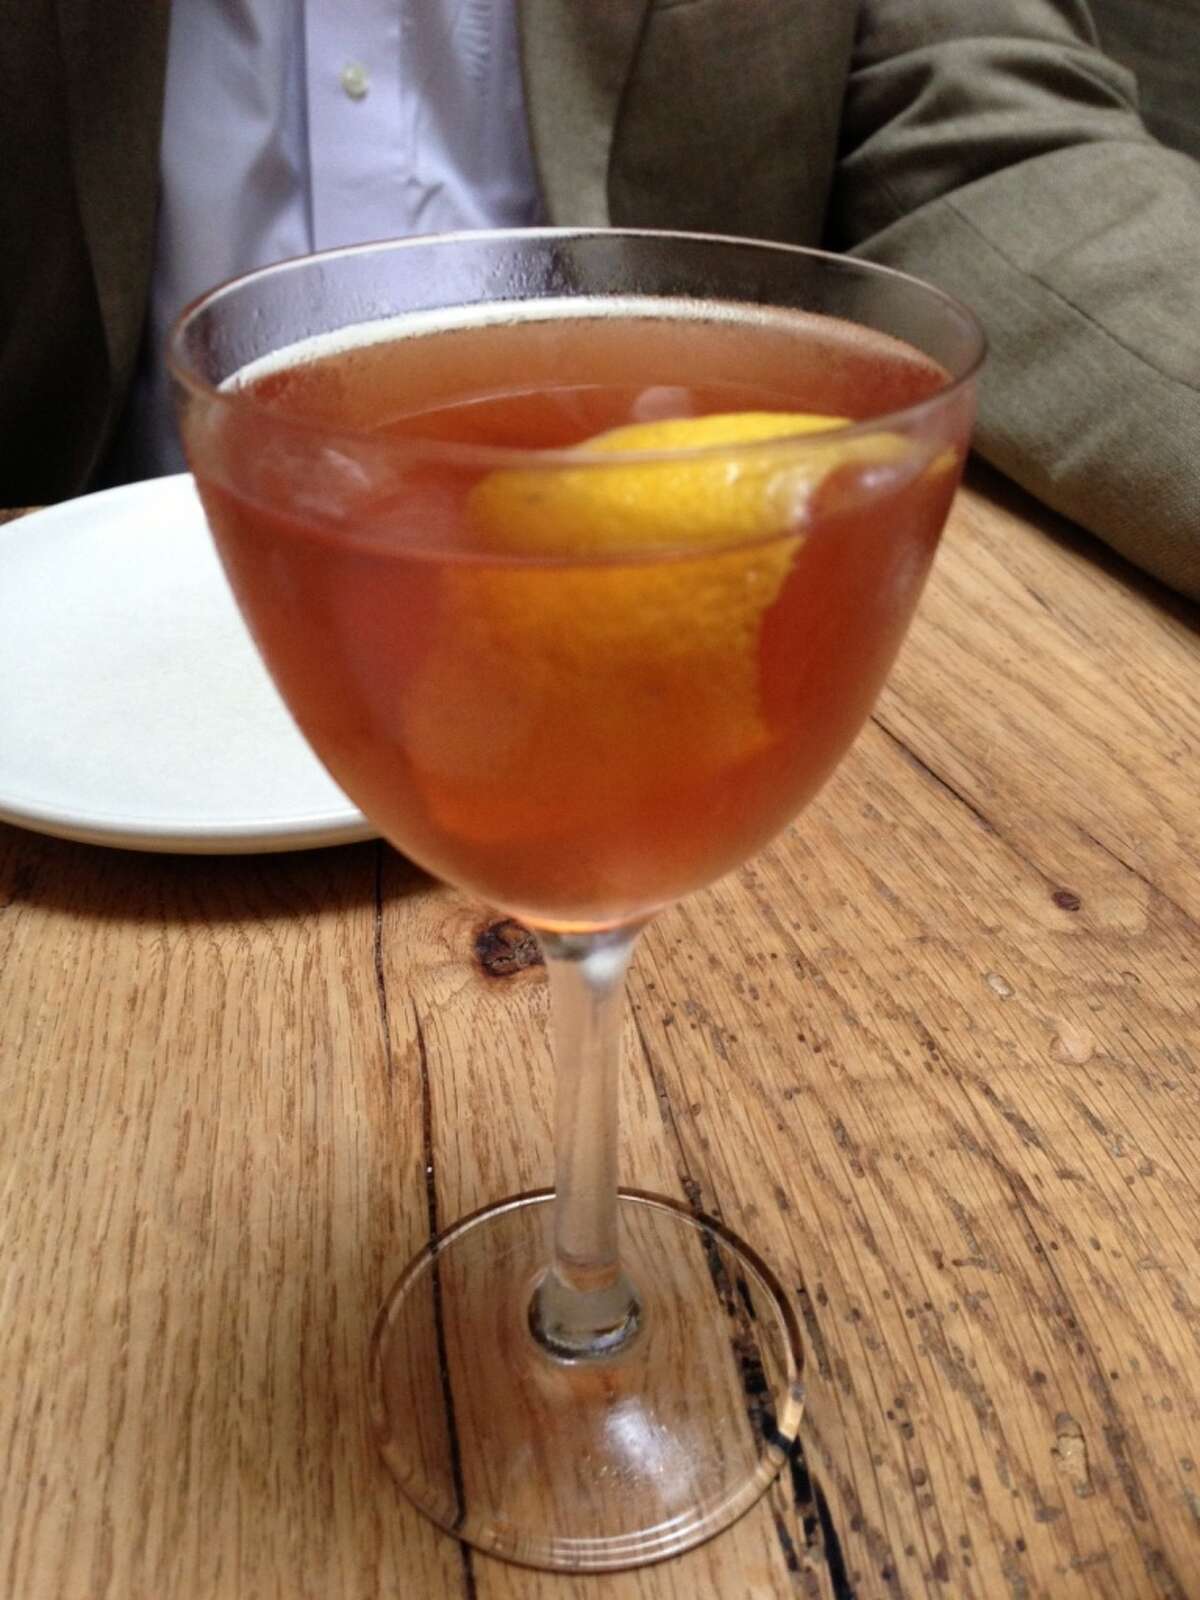 Hanky Panky ($11) with gin vermouth, Fernet and orange zest